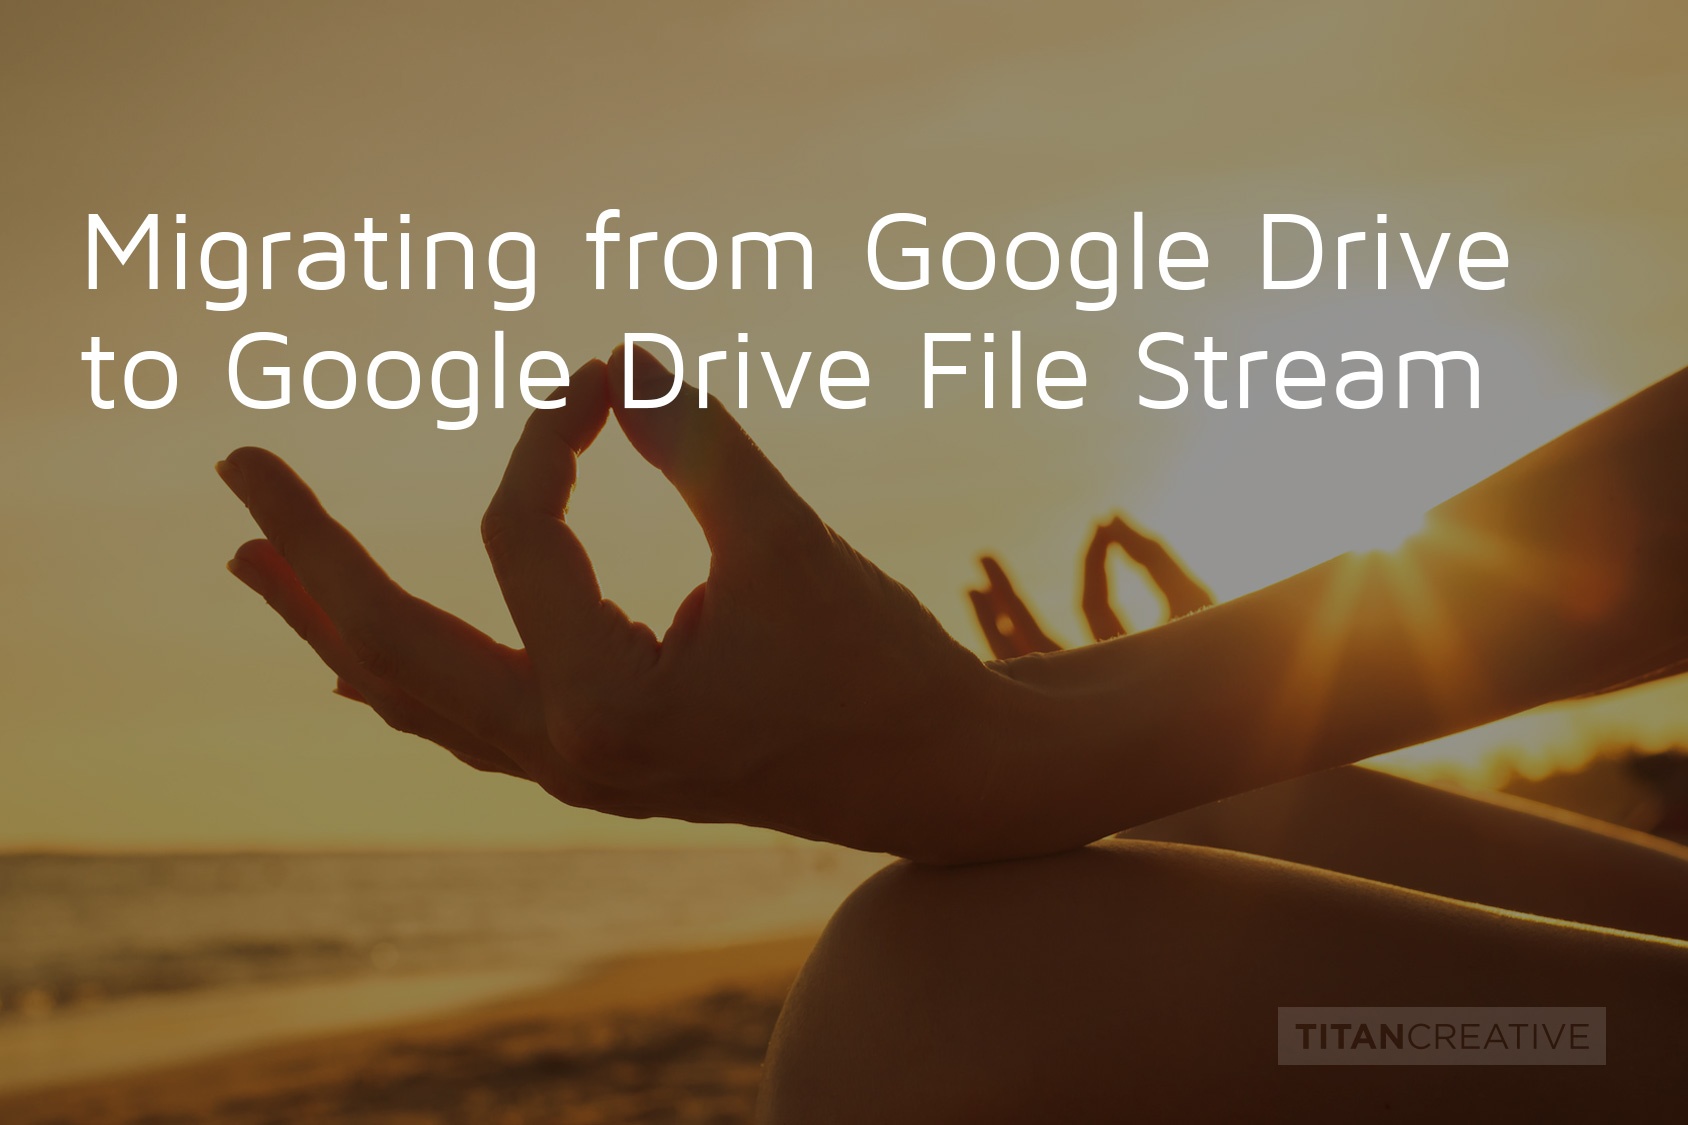 Google Drive for Mac/PC is going away soon - migrate safely.